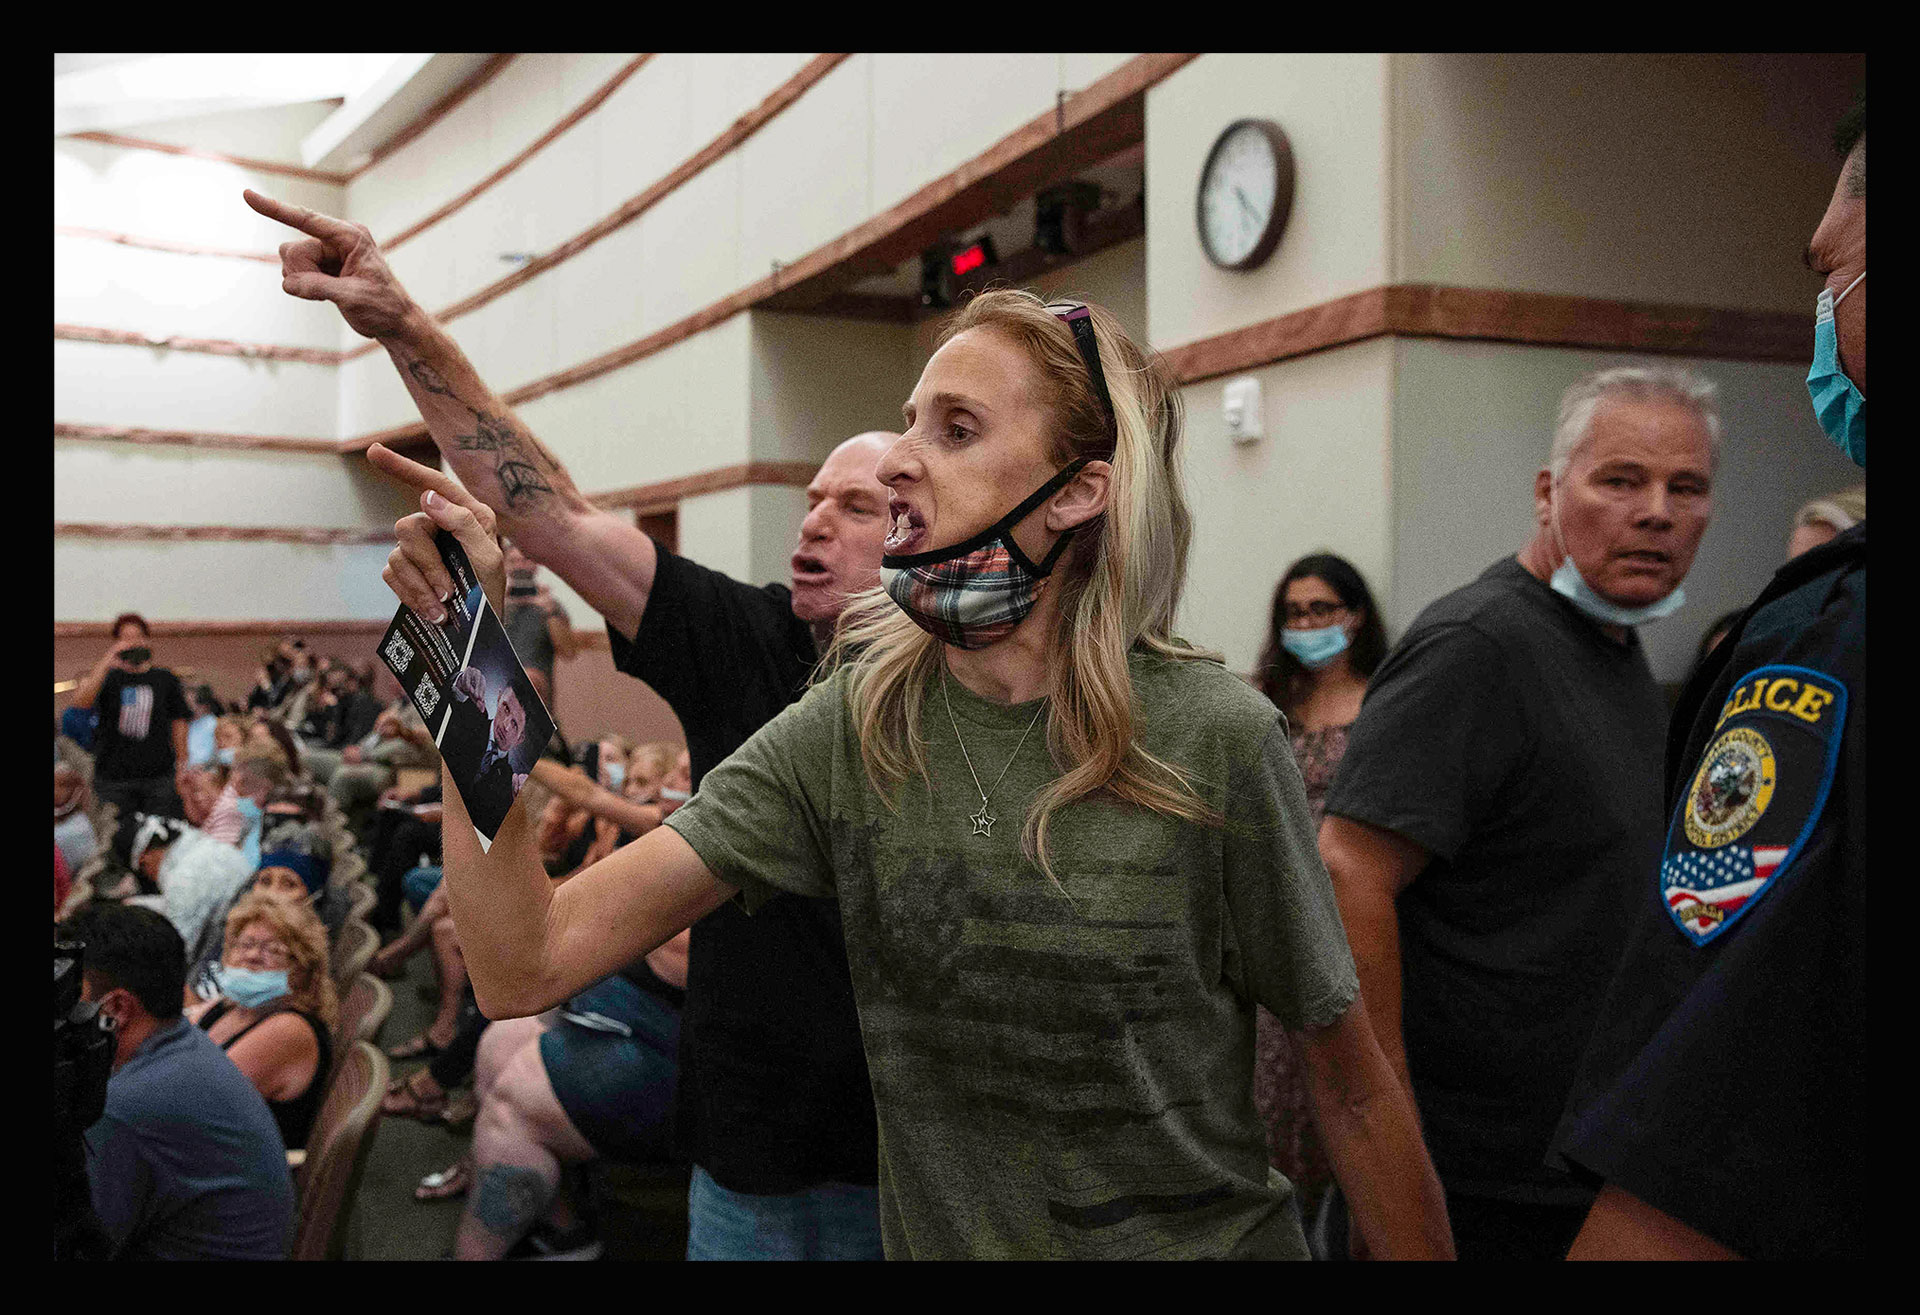 Protesters against a COVID-19 mandate gesture as they are escorted out of the Clark County School Board meeting at the Clark County Government Center, in Las Vegas, on Aug. 12, 2021. (Bizuayehu Tesfaye—Las Vegas Review-Journal/AP)